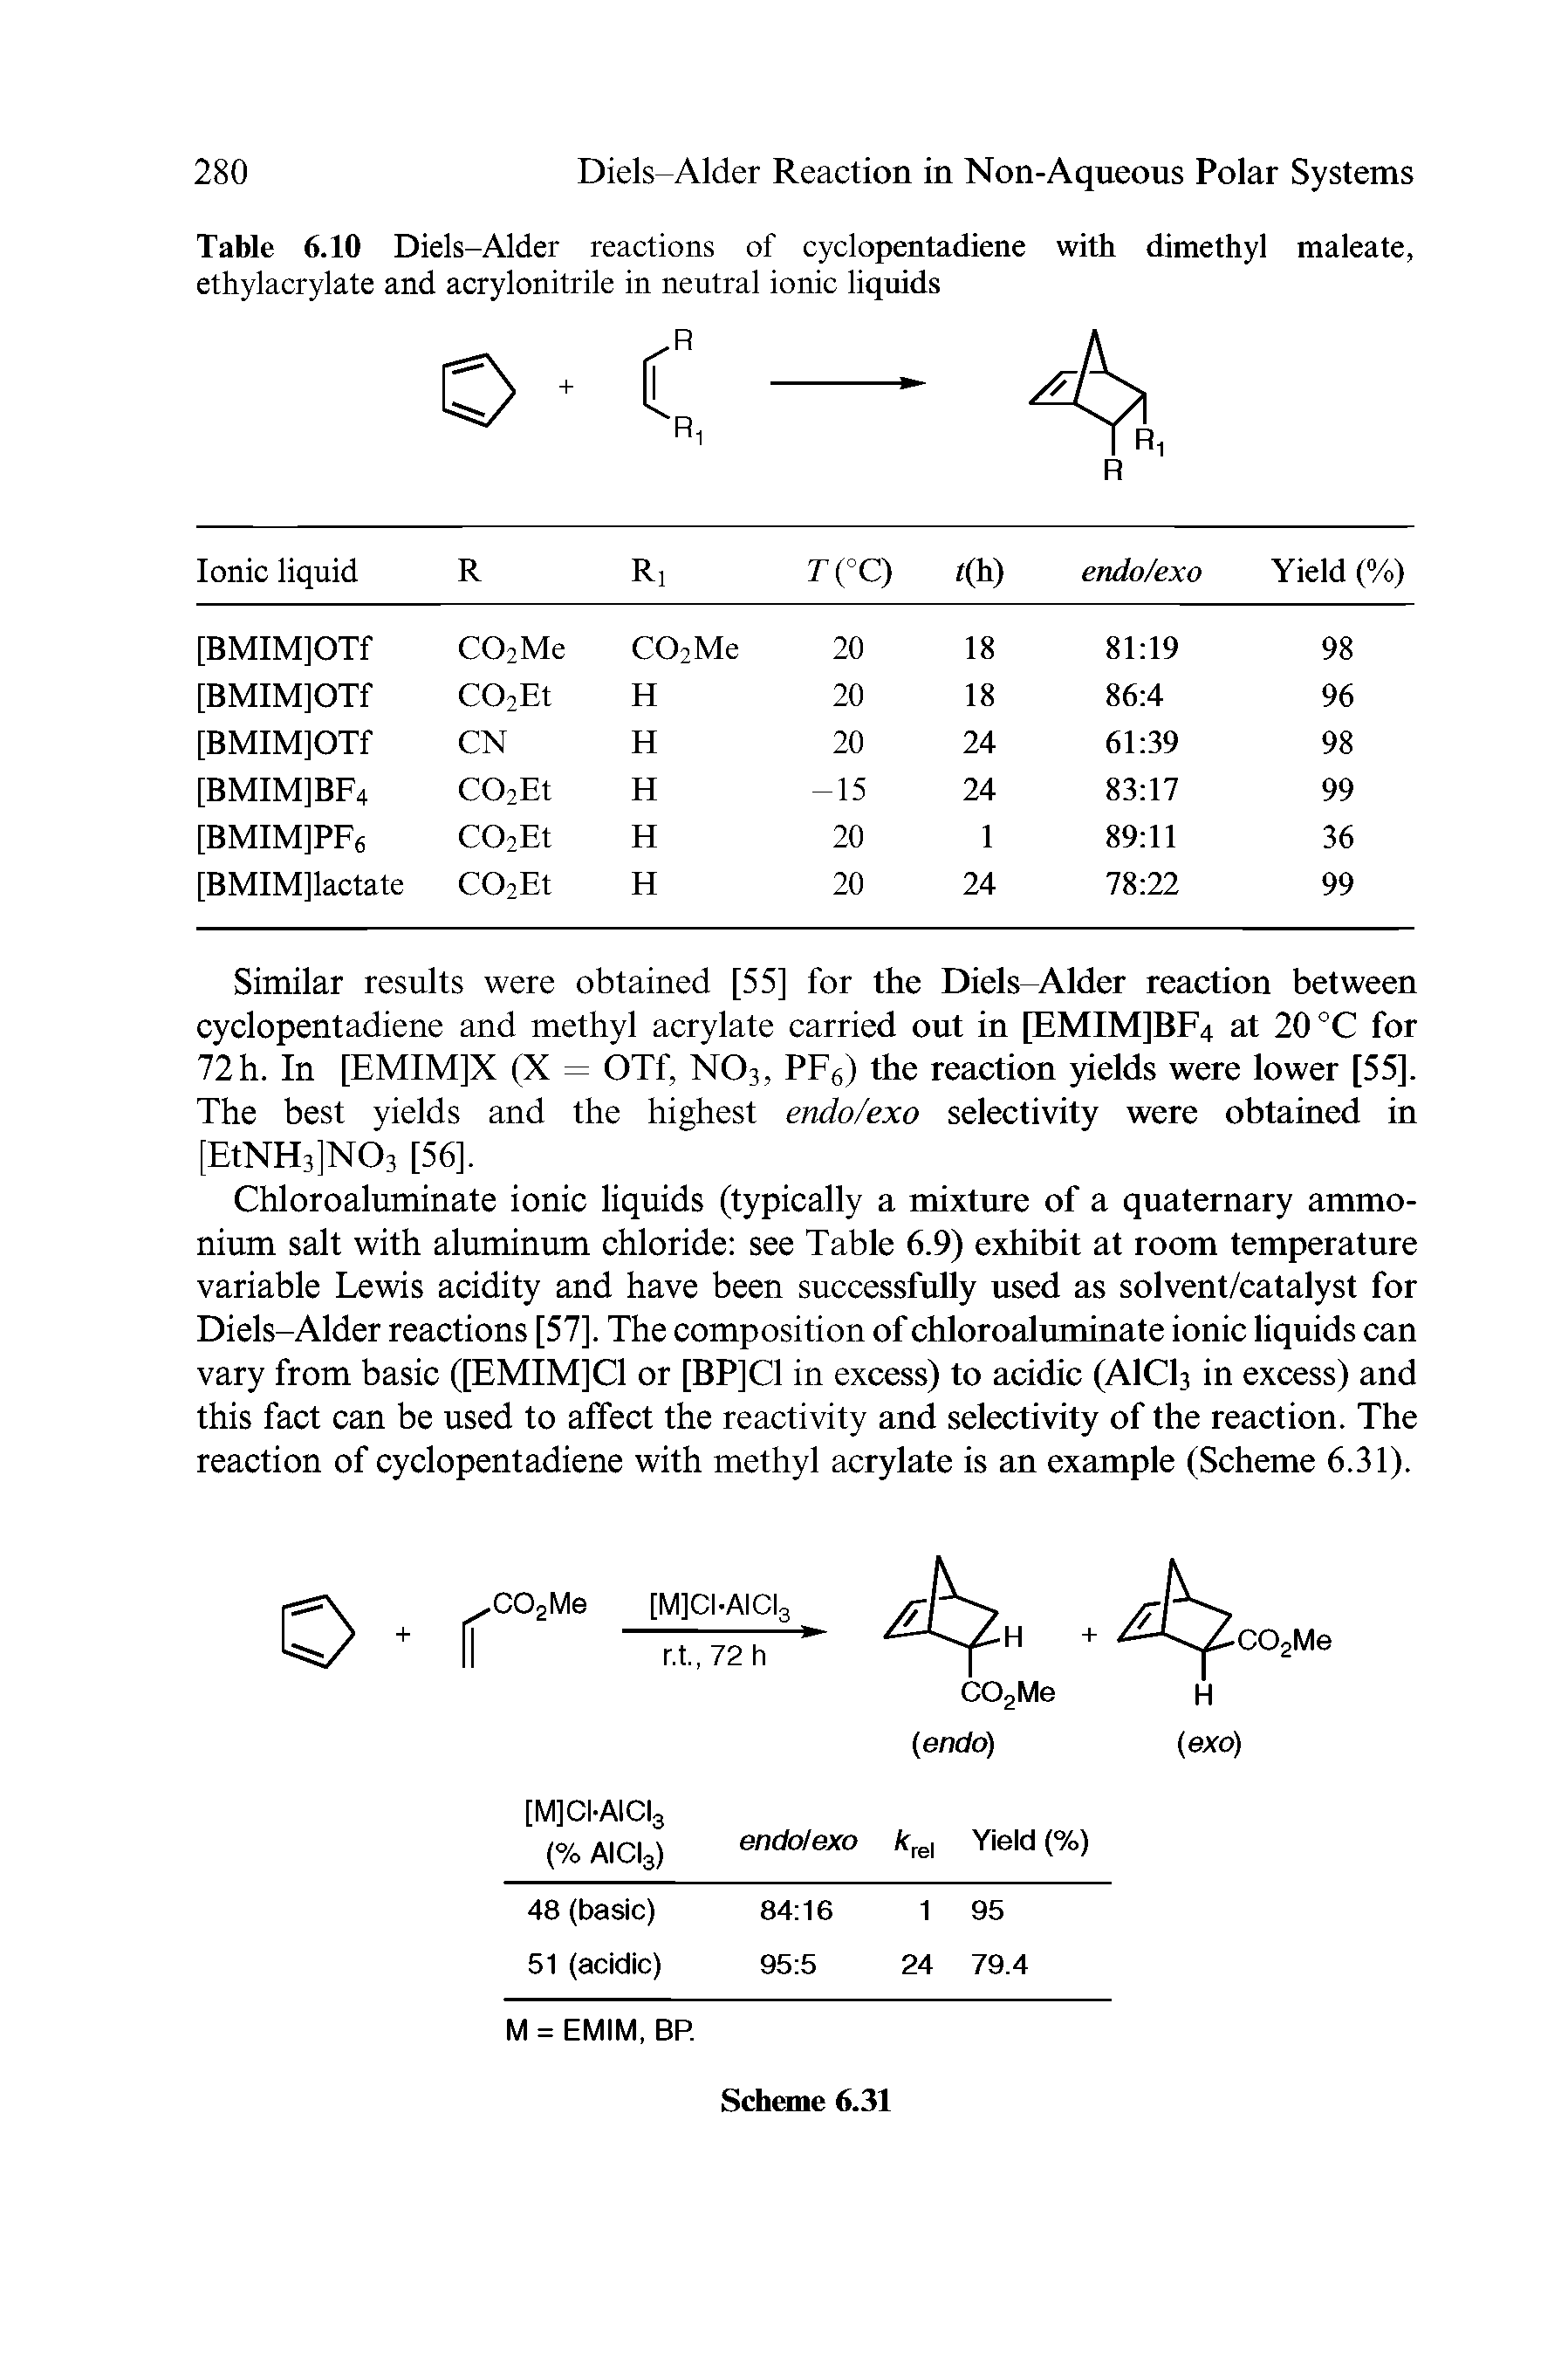 Table 6.10 Diels-Alder reactions of cyclopentadiene with dimethyl maleate, ethylacrylate and acrylonitrile in neutral ionic liquids...